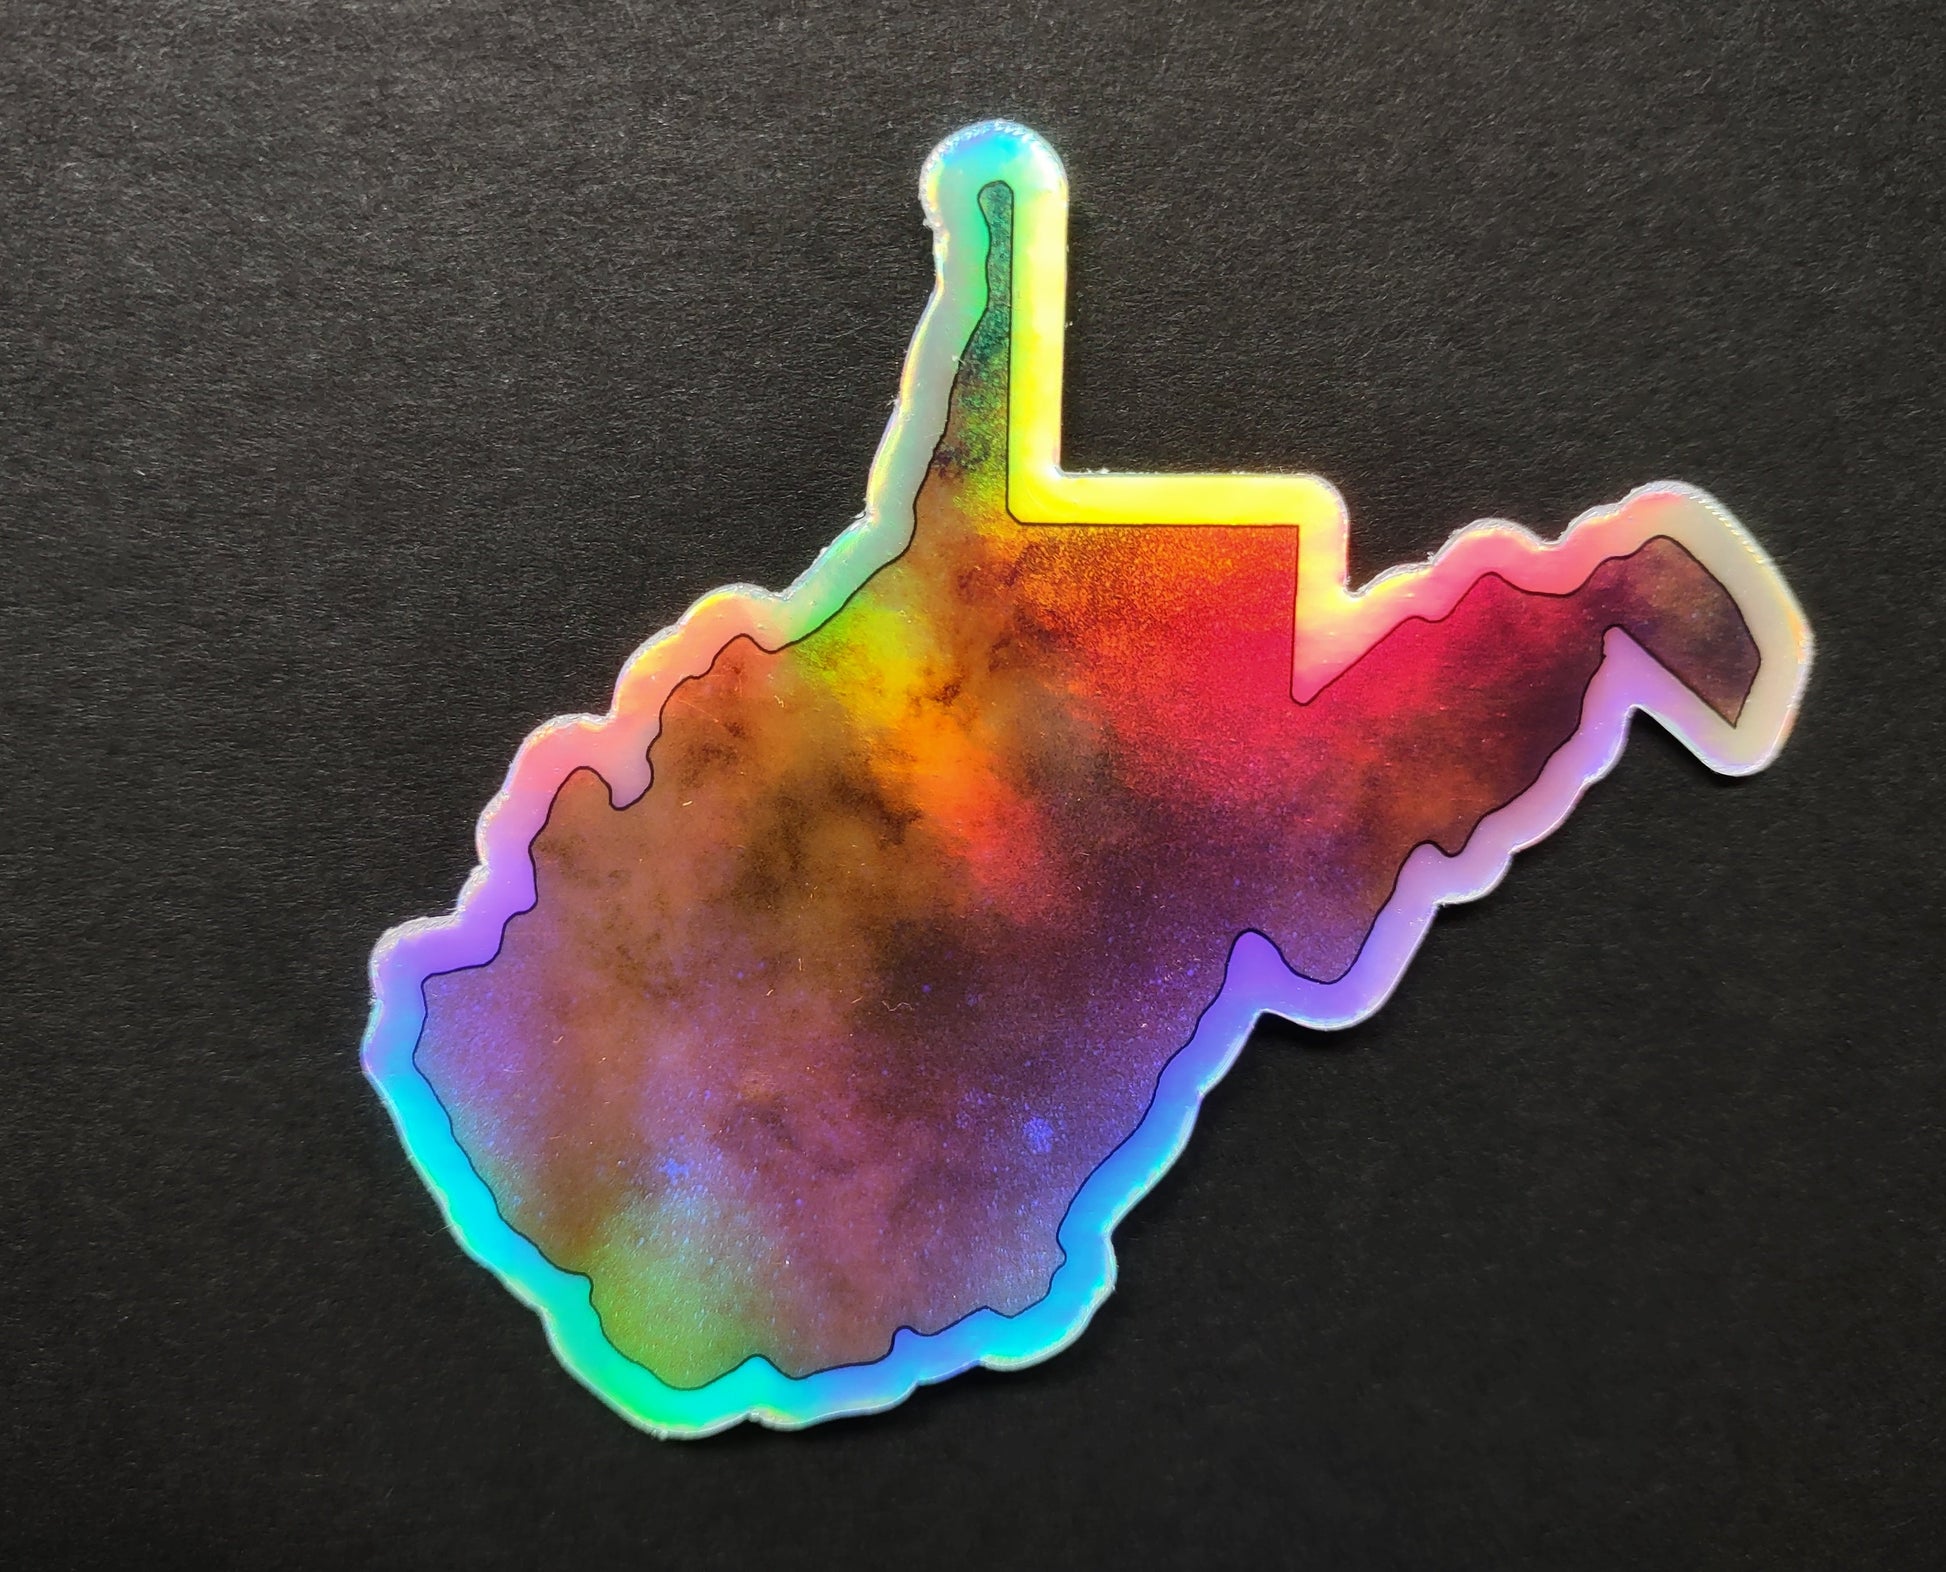 West Virginia Holographic Milky Way Sticker v2 - Vinyl Sticker - Stars - Reflection in a Pool